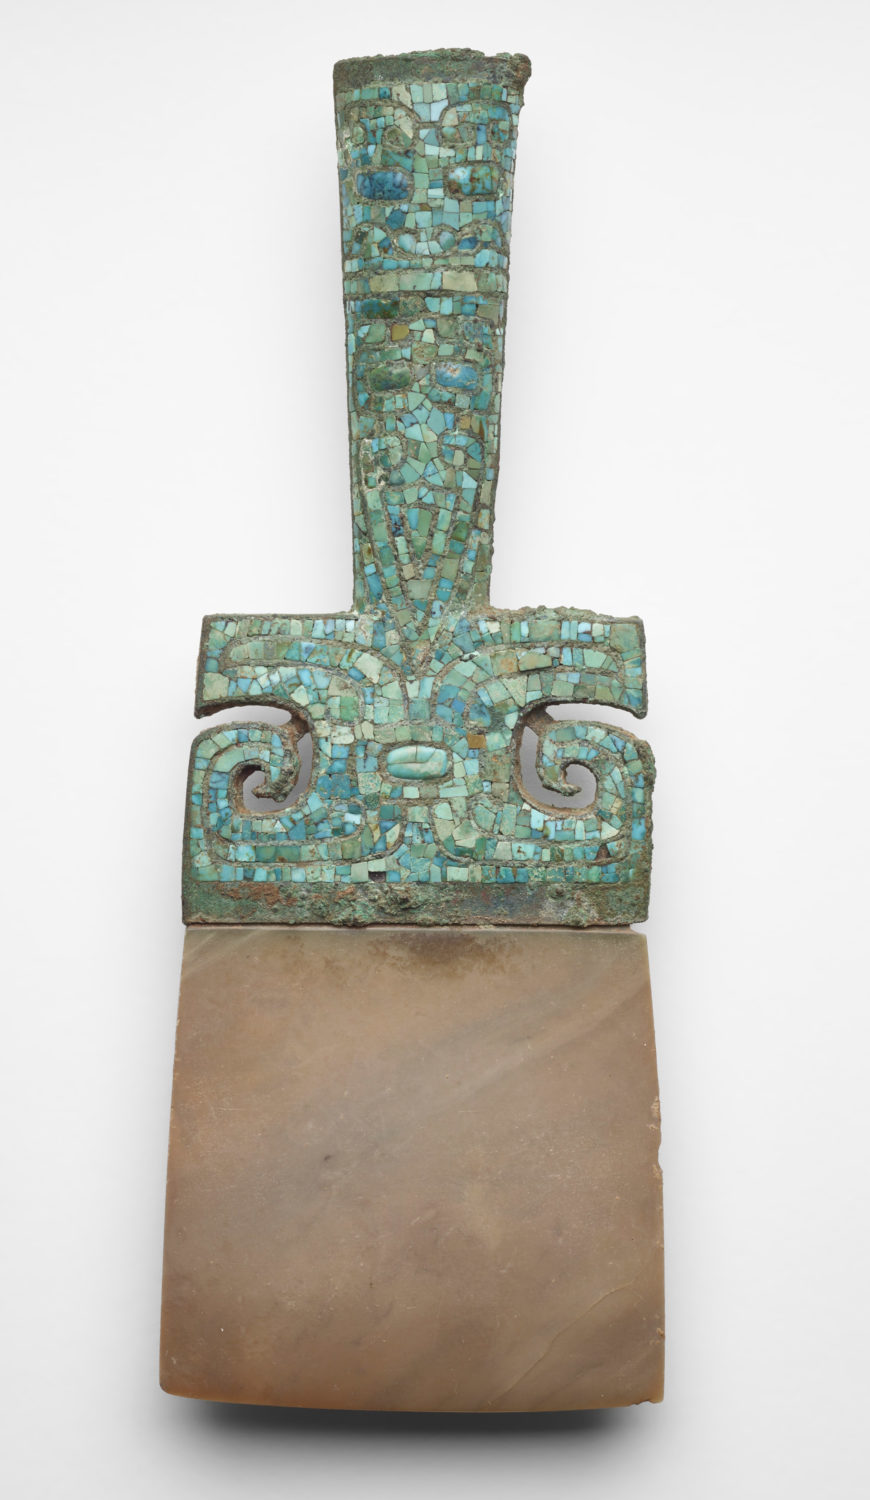 Axe (yue 鉞), Anyang period, Late Shang dynasty, ca. 1300-ca. 1050 BCE, Bronze with turquoise inlay and jade (nephrite) blade, 21.3 high x 7.9 x 2.1 cm, China, probably Henan province, Anyang (Freer Gallery of Art, Smithsonian, Washington, DC: Purchase — Charles Lang Freer Endowment, F1941.4)